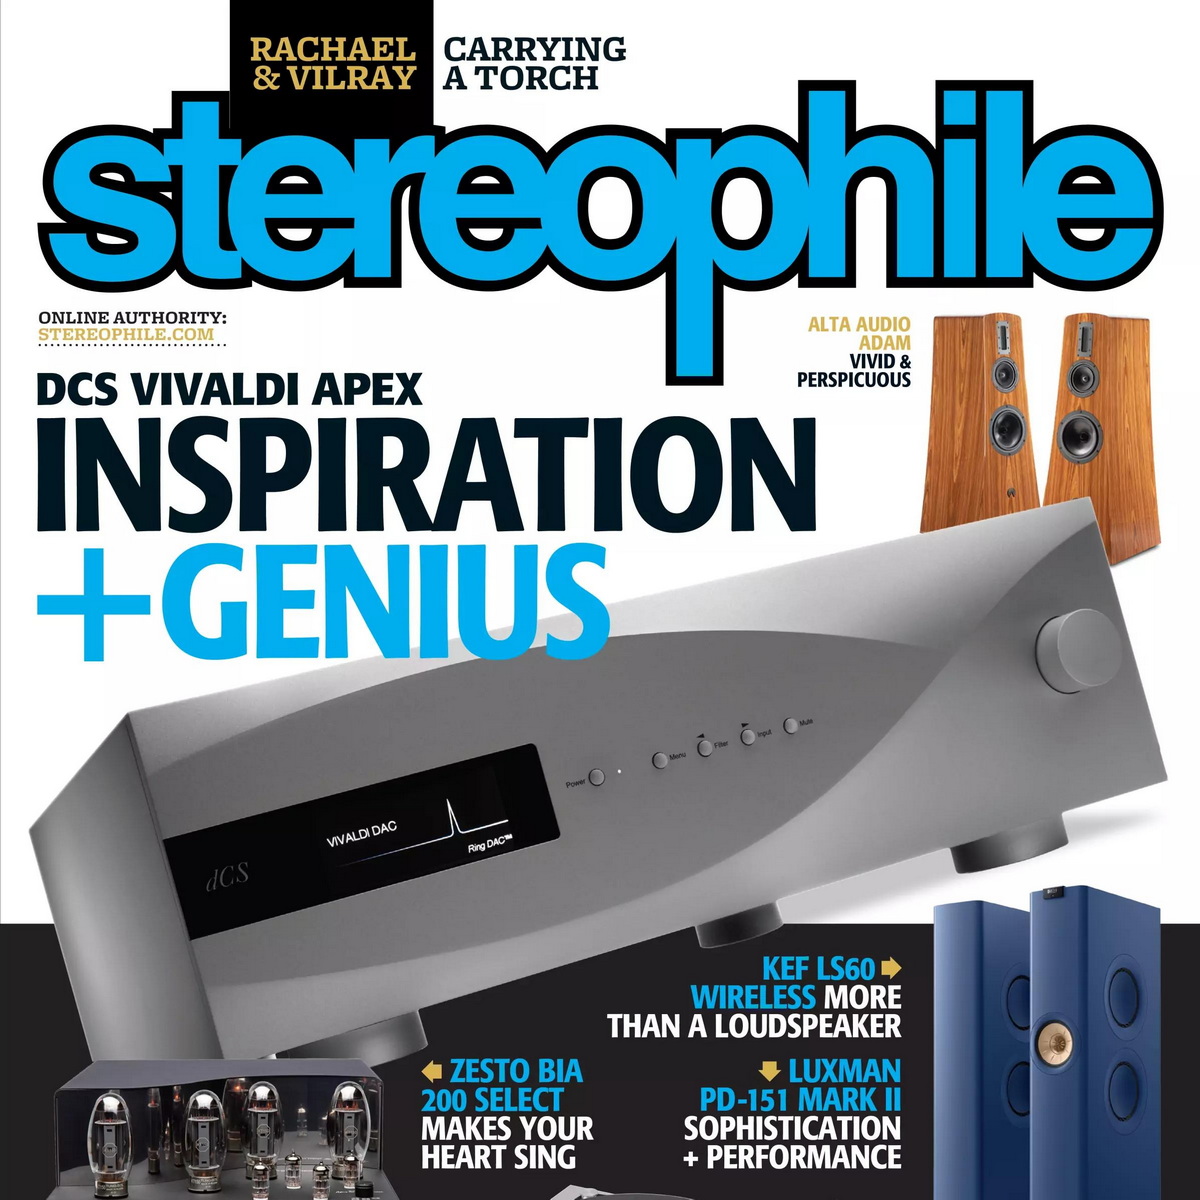 „Stereophile” Vol. 47, No. 03 ⸜ MARCH 2023